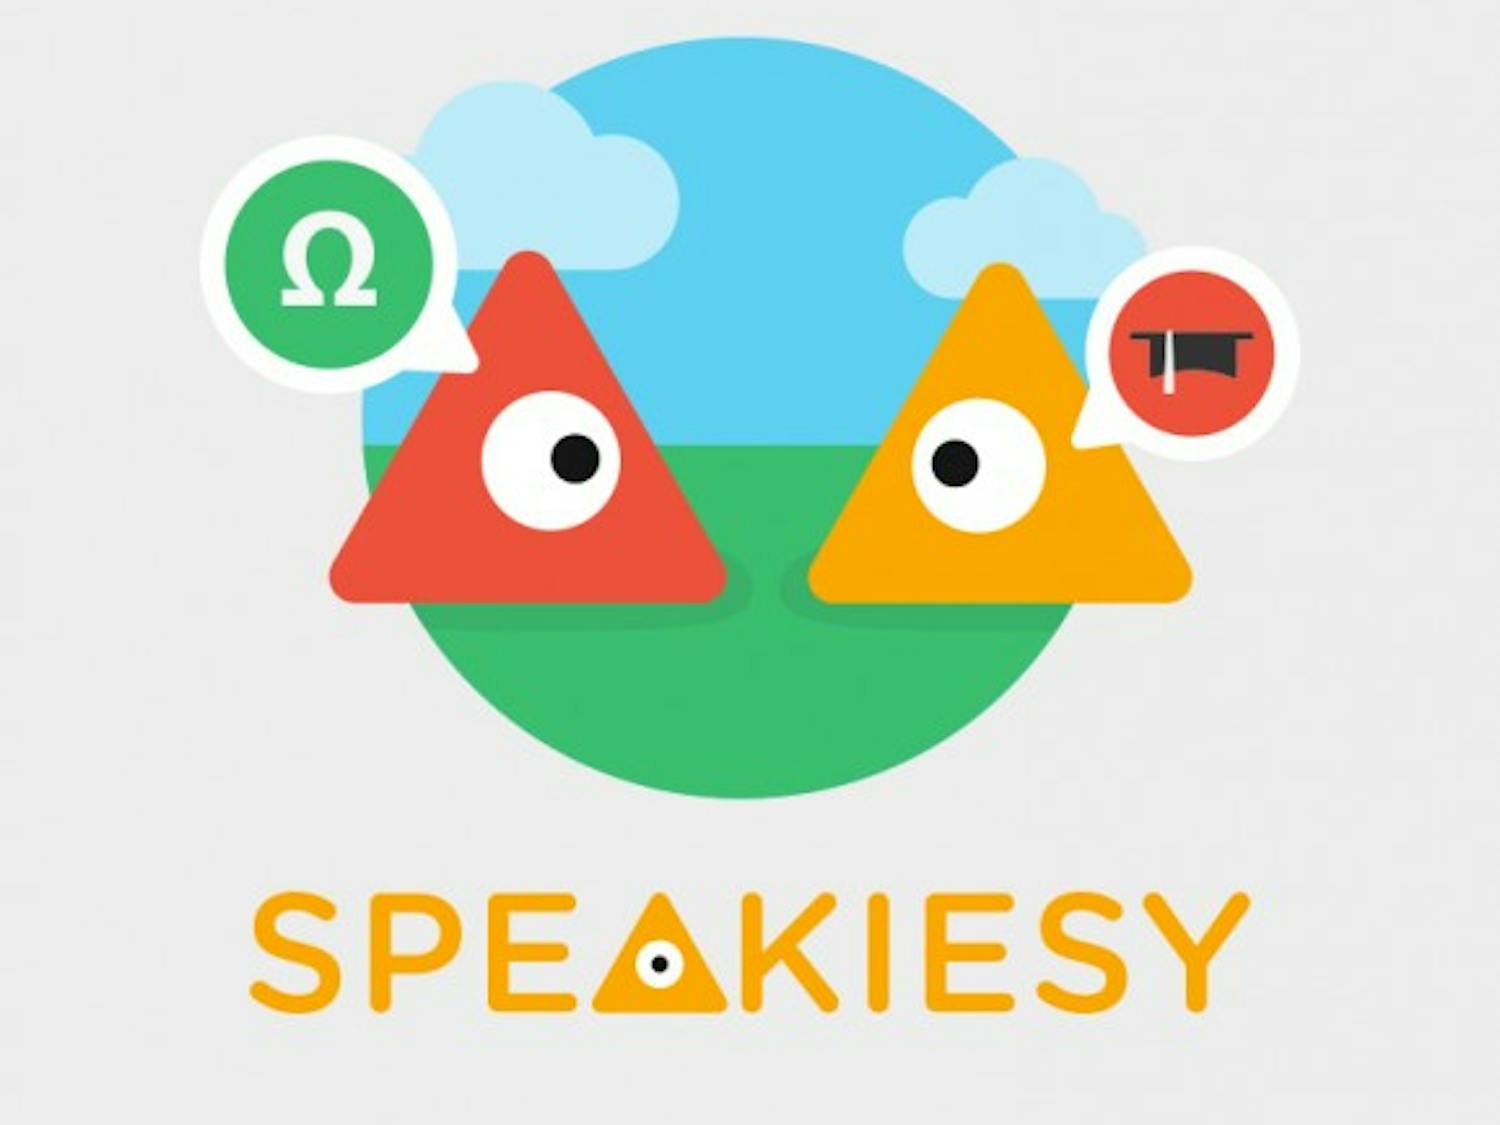 Speakiesy, a new app that connects students to one another based upon their college campus, combines many aspects of social media together in one place.